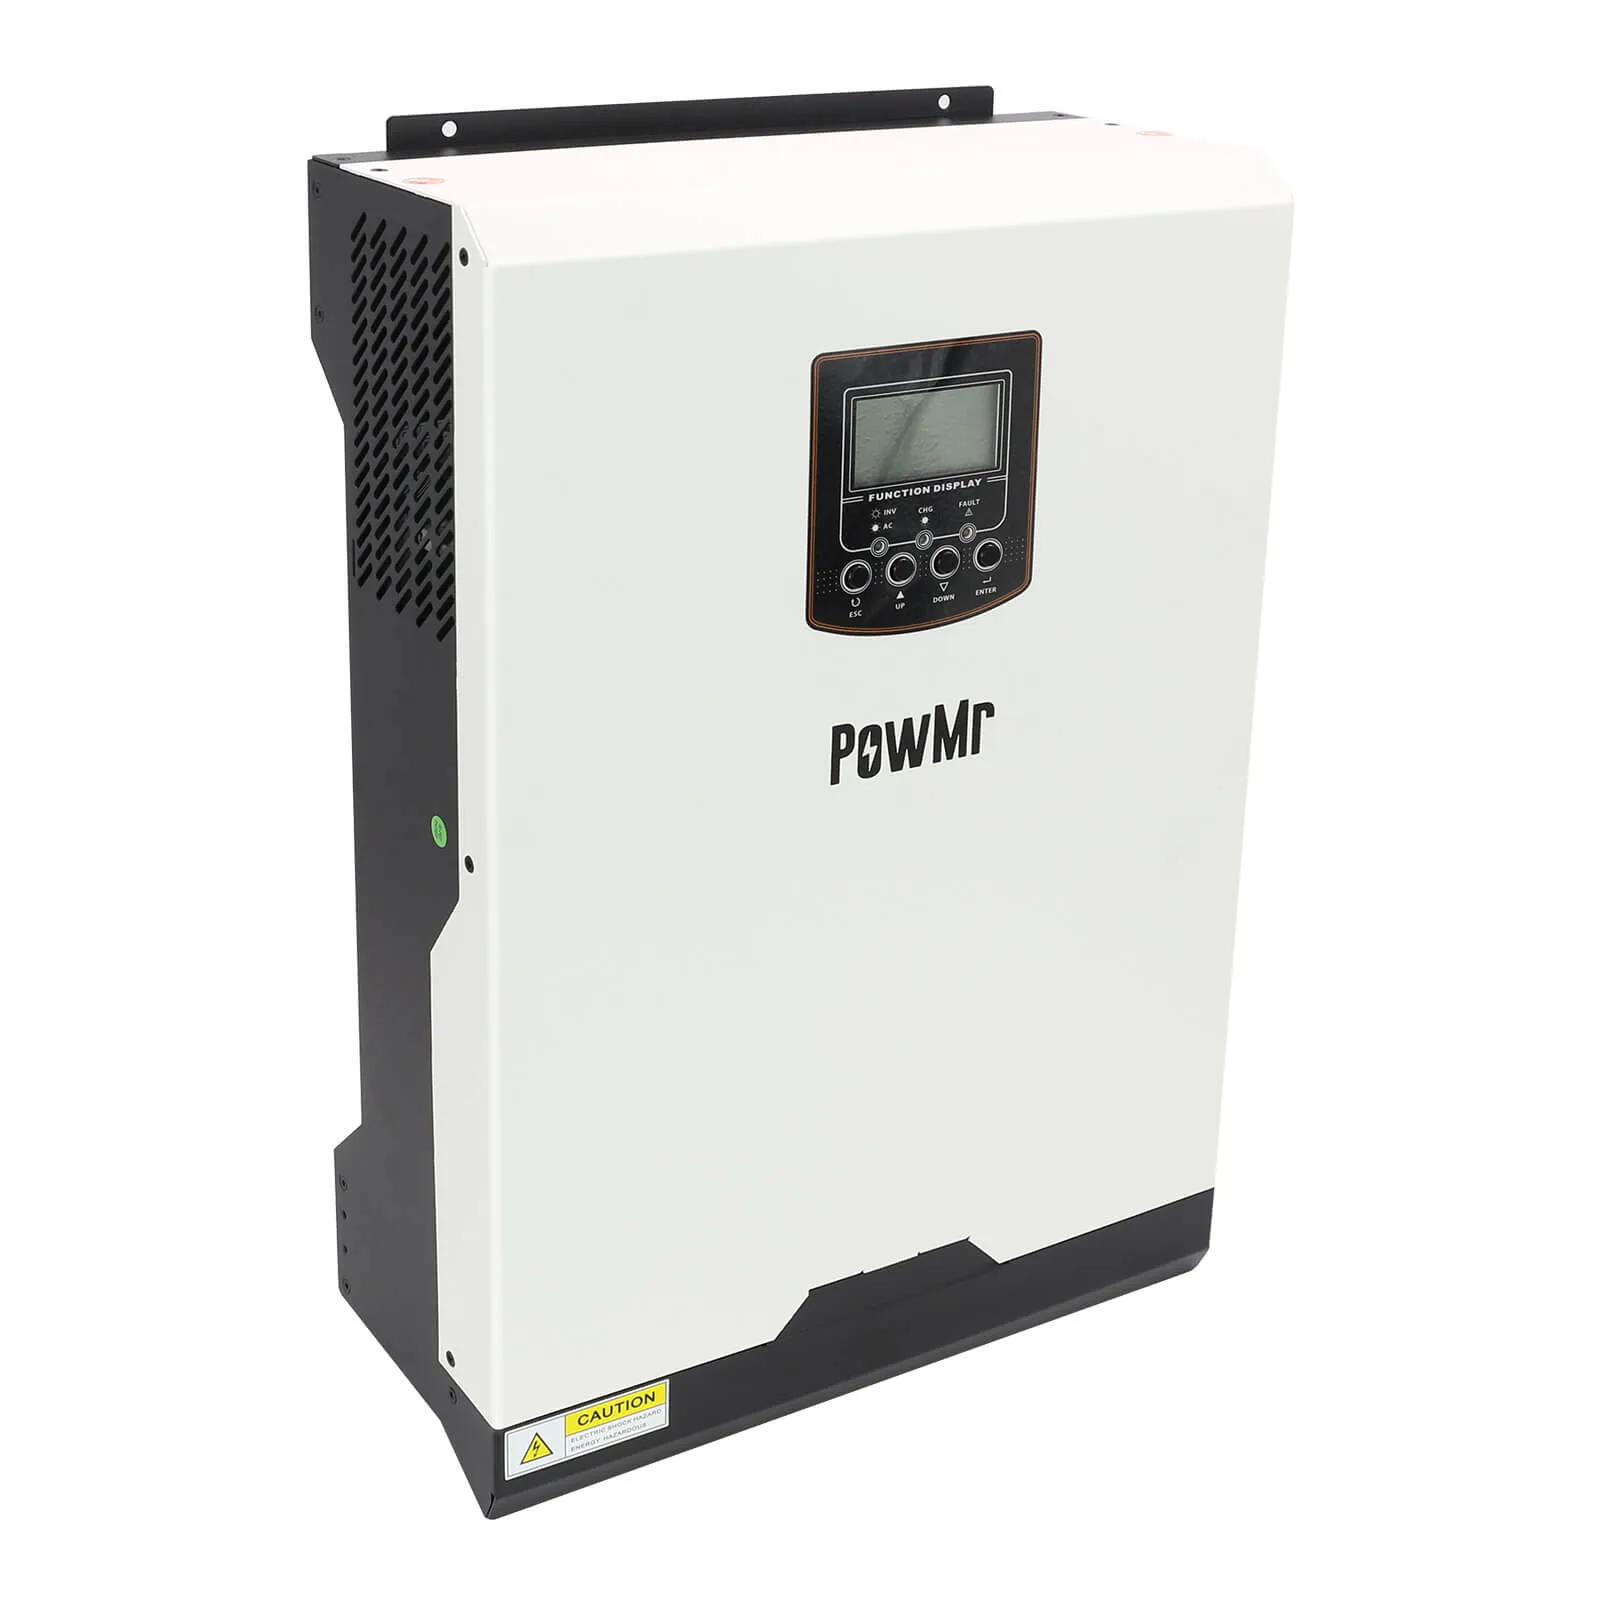 PowMr 3KVA Inverter 24vDC to 110VAC with 60A PWM Controller